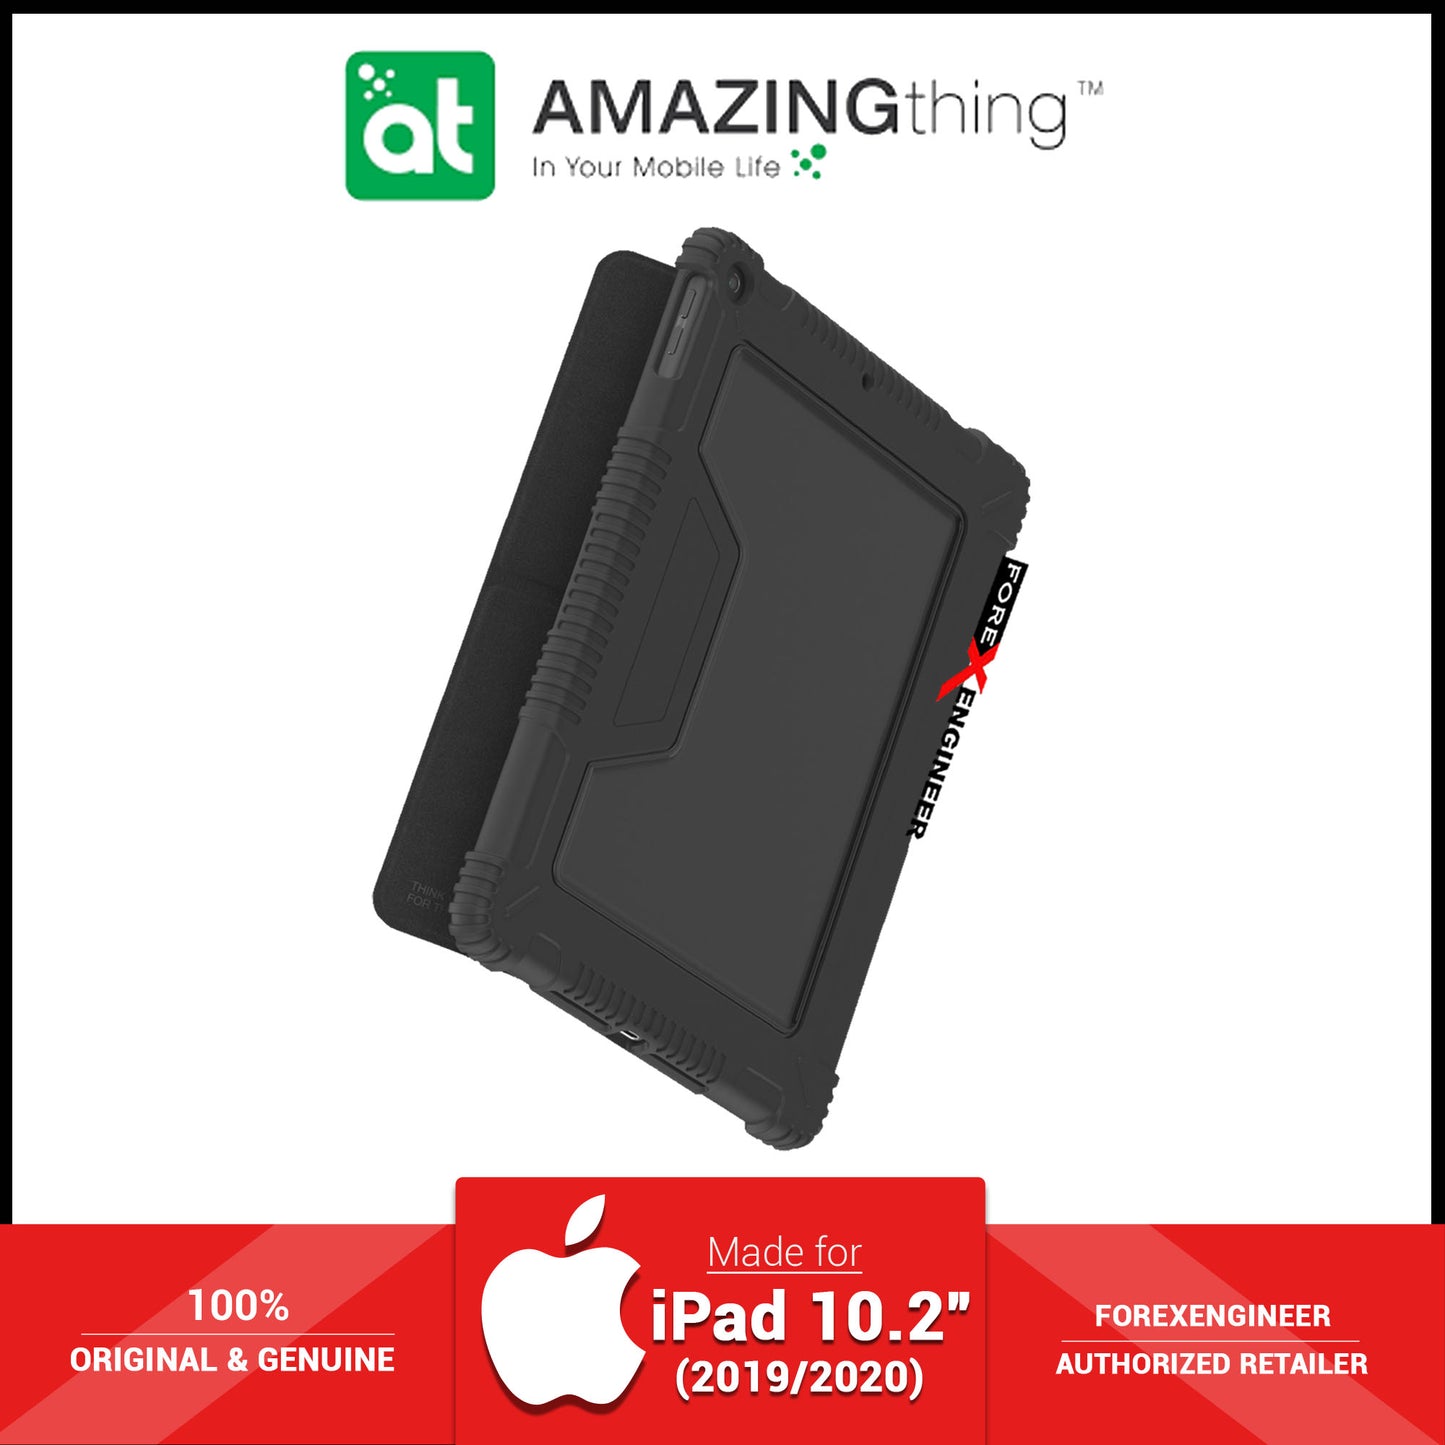 AmazingThing Military Drop Proof Case for iPad 10.2inch 7th - 8th - 9th Gen ( 2019 - 2021 ) - Antimicrobial Case - Black (Barcode: 4892220389371 )